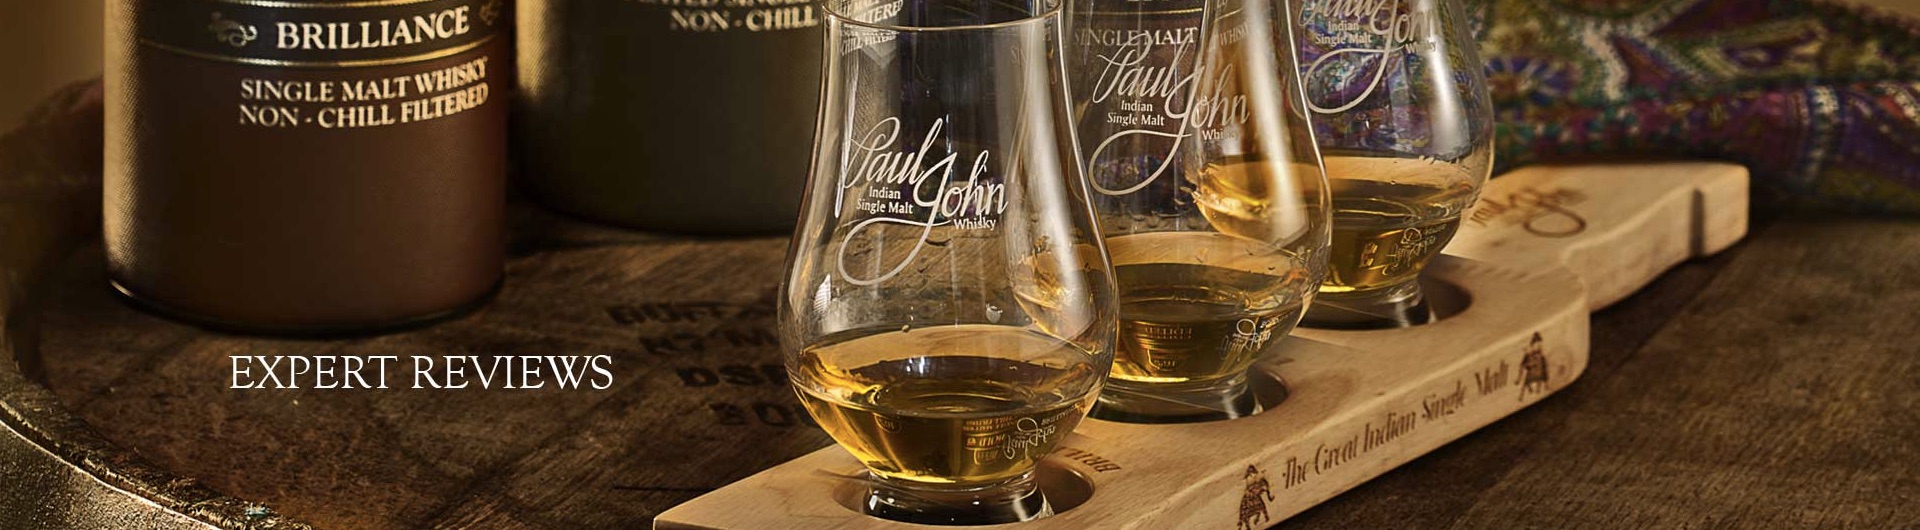 Whisky Experts, Aficionados and Best Whisky Bloggers review on Paul John Single Malt